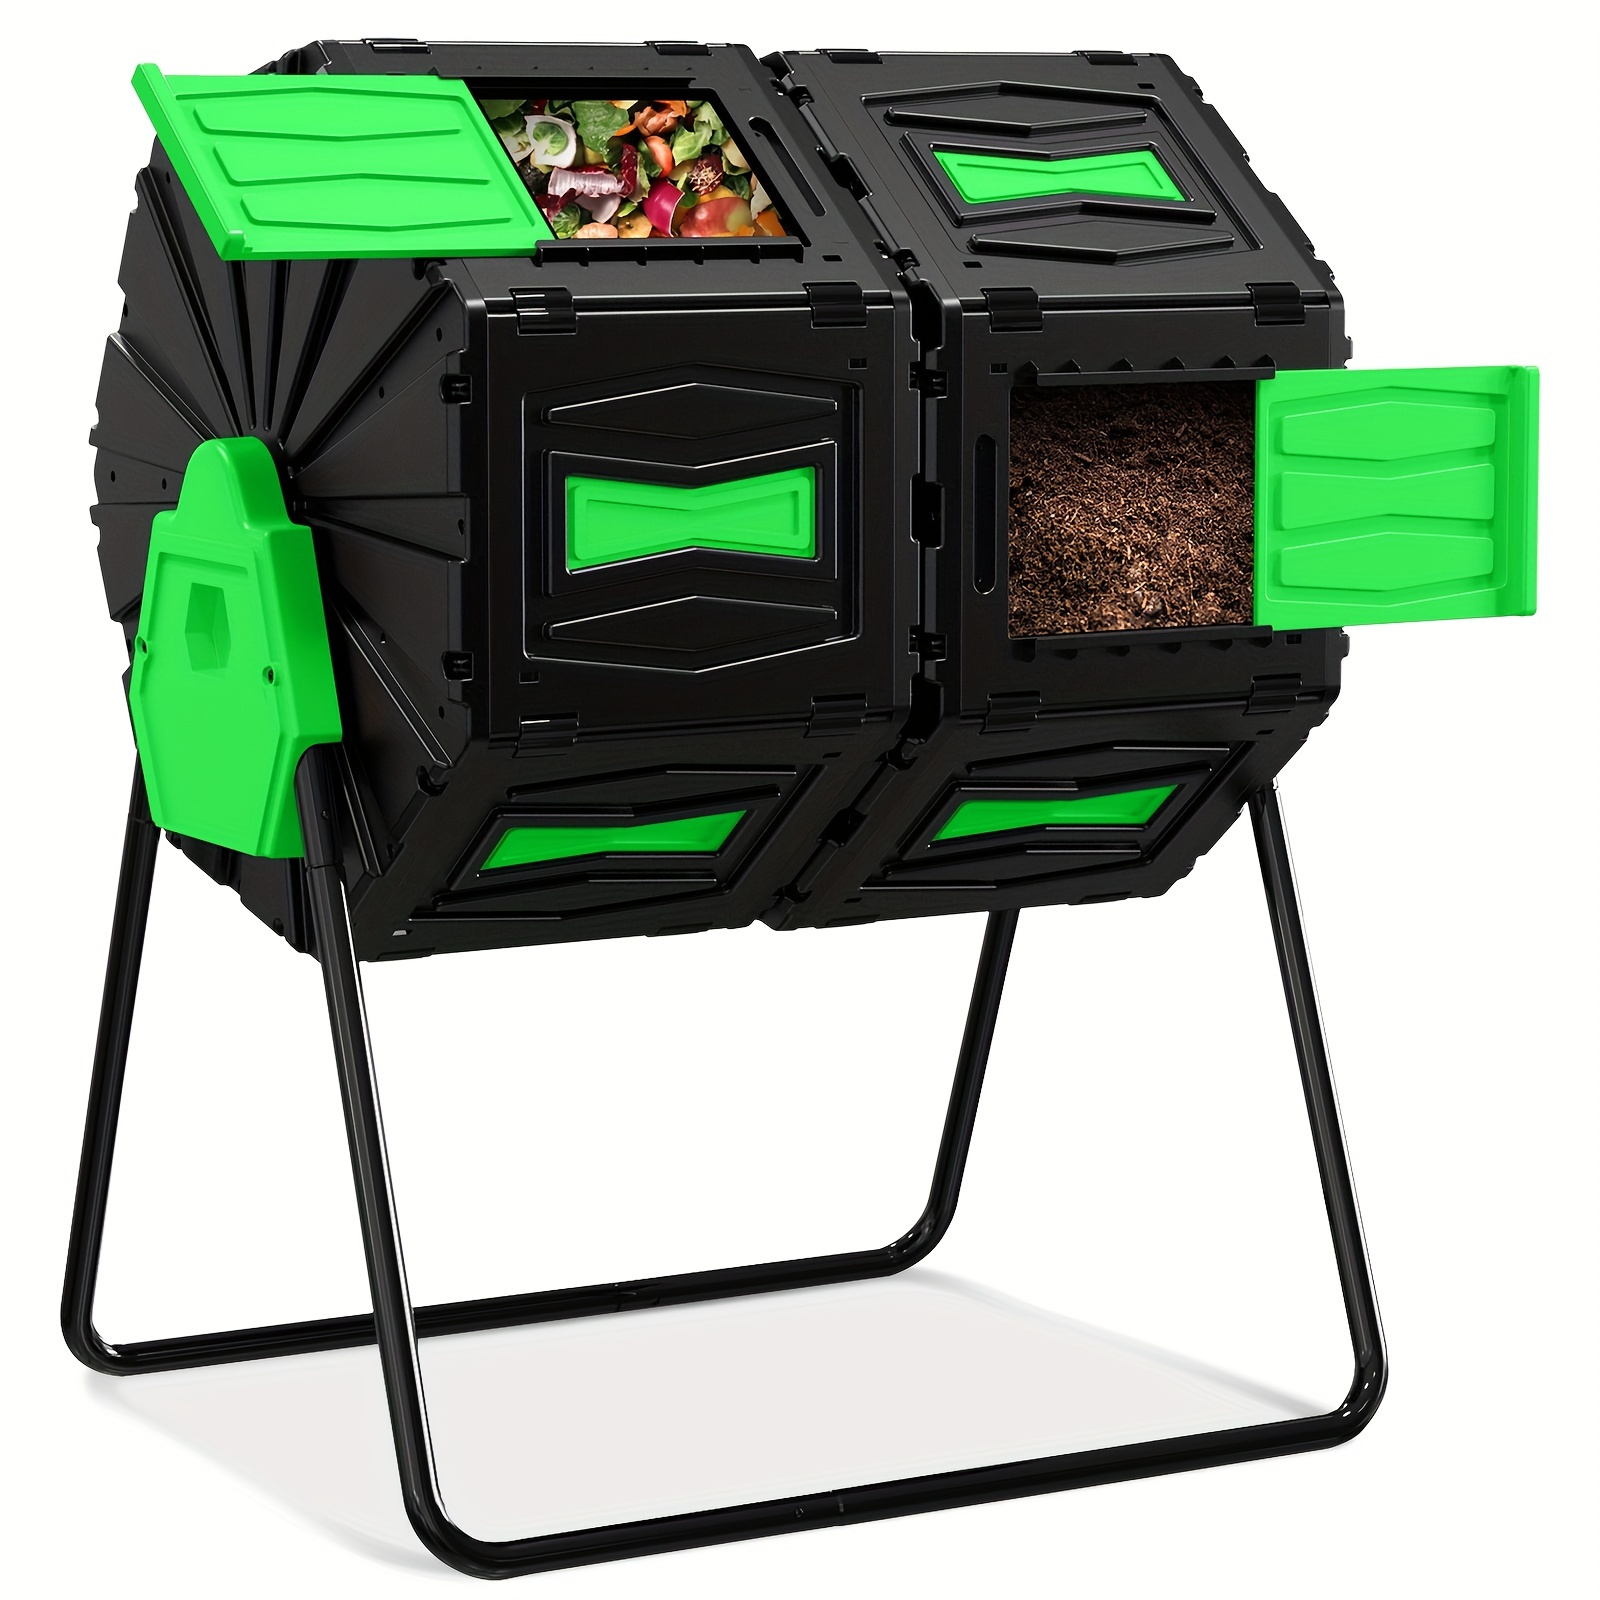 

Compost Tumbler, Easy Assemble & Efficient Outdoor Compost Bin, 45 Gallon/170 Liter Large Dual Chamber Rotating Composter For Garden, Kitchen, And Yard Waste, Green Door